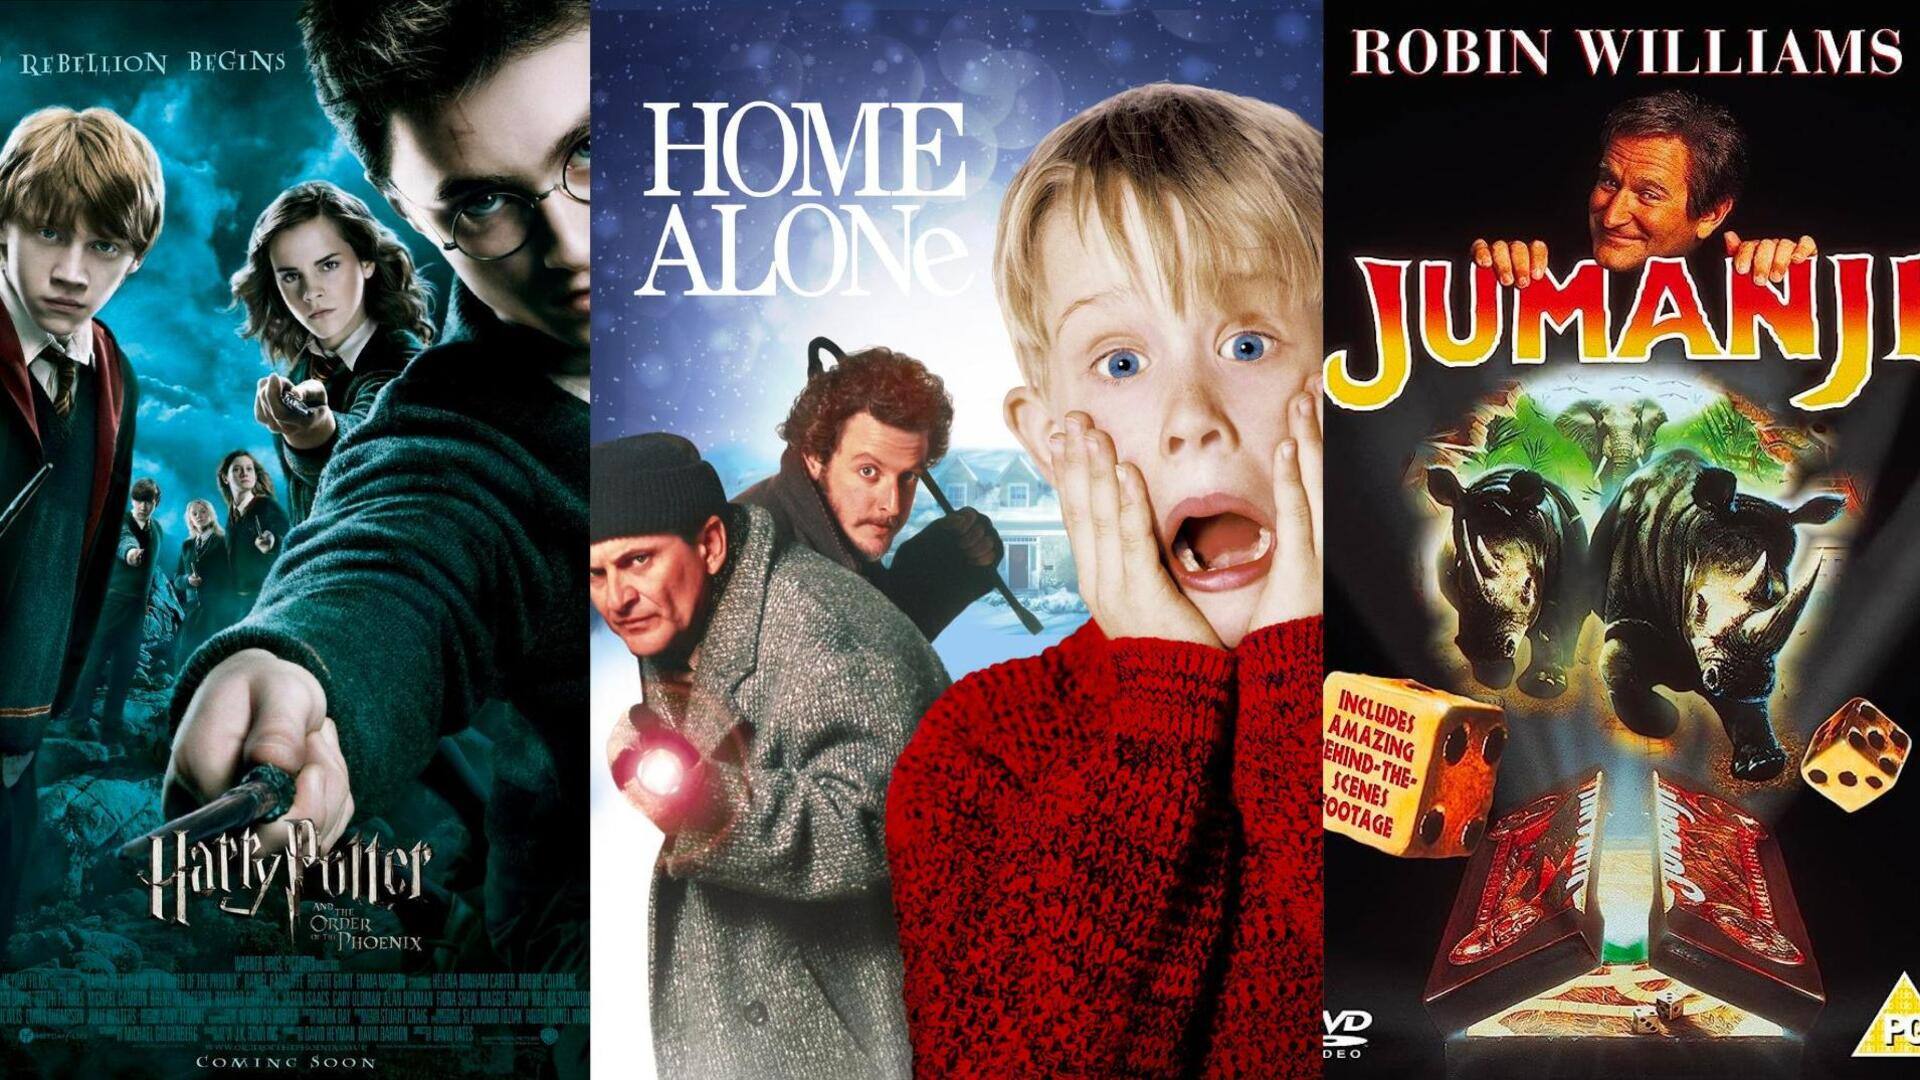 From 'Harry Potter' to 'Home Alone': Top family-friendly PG-rated movies